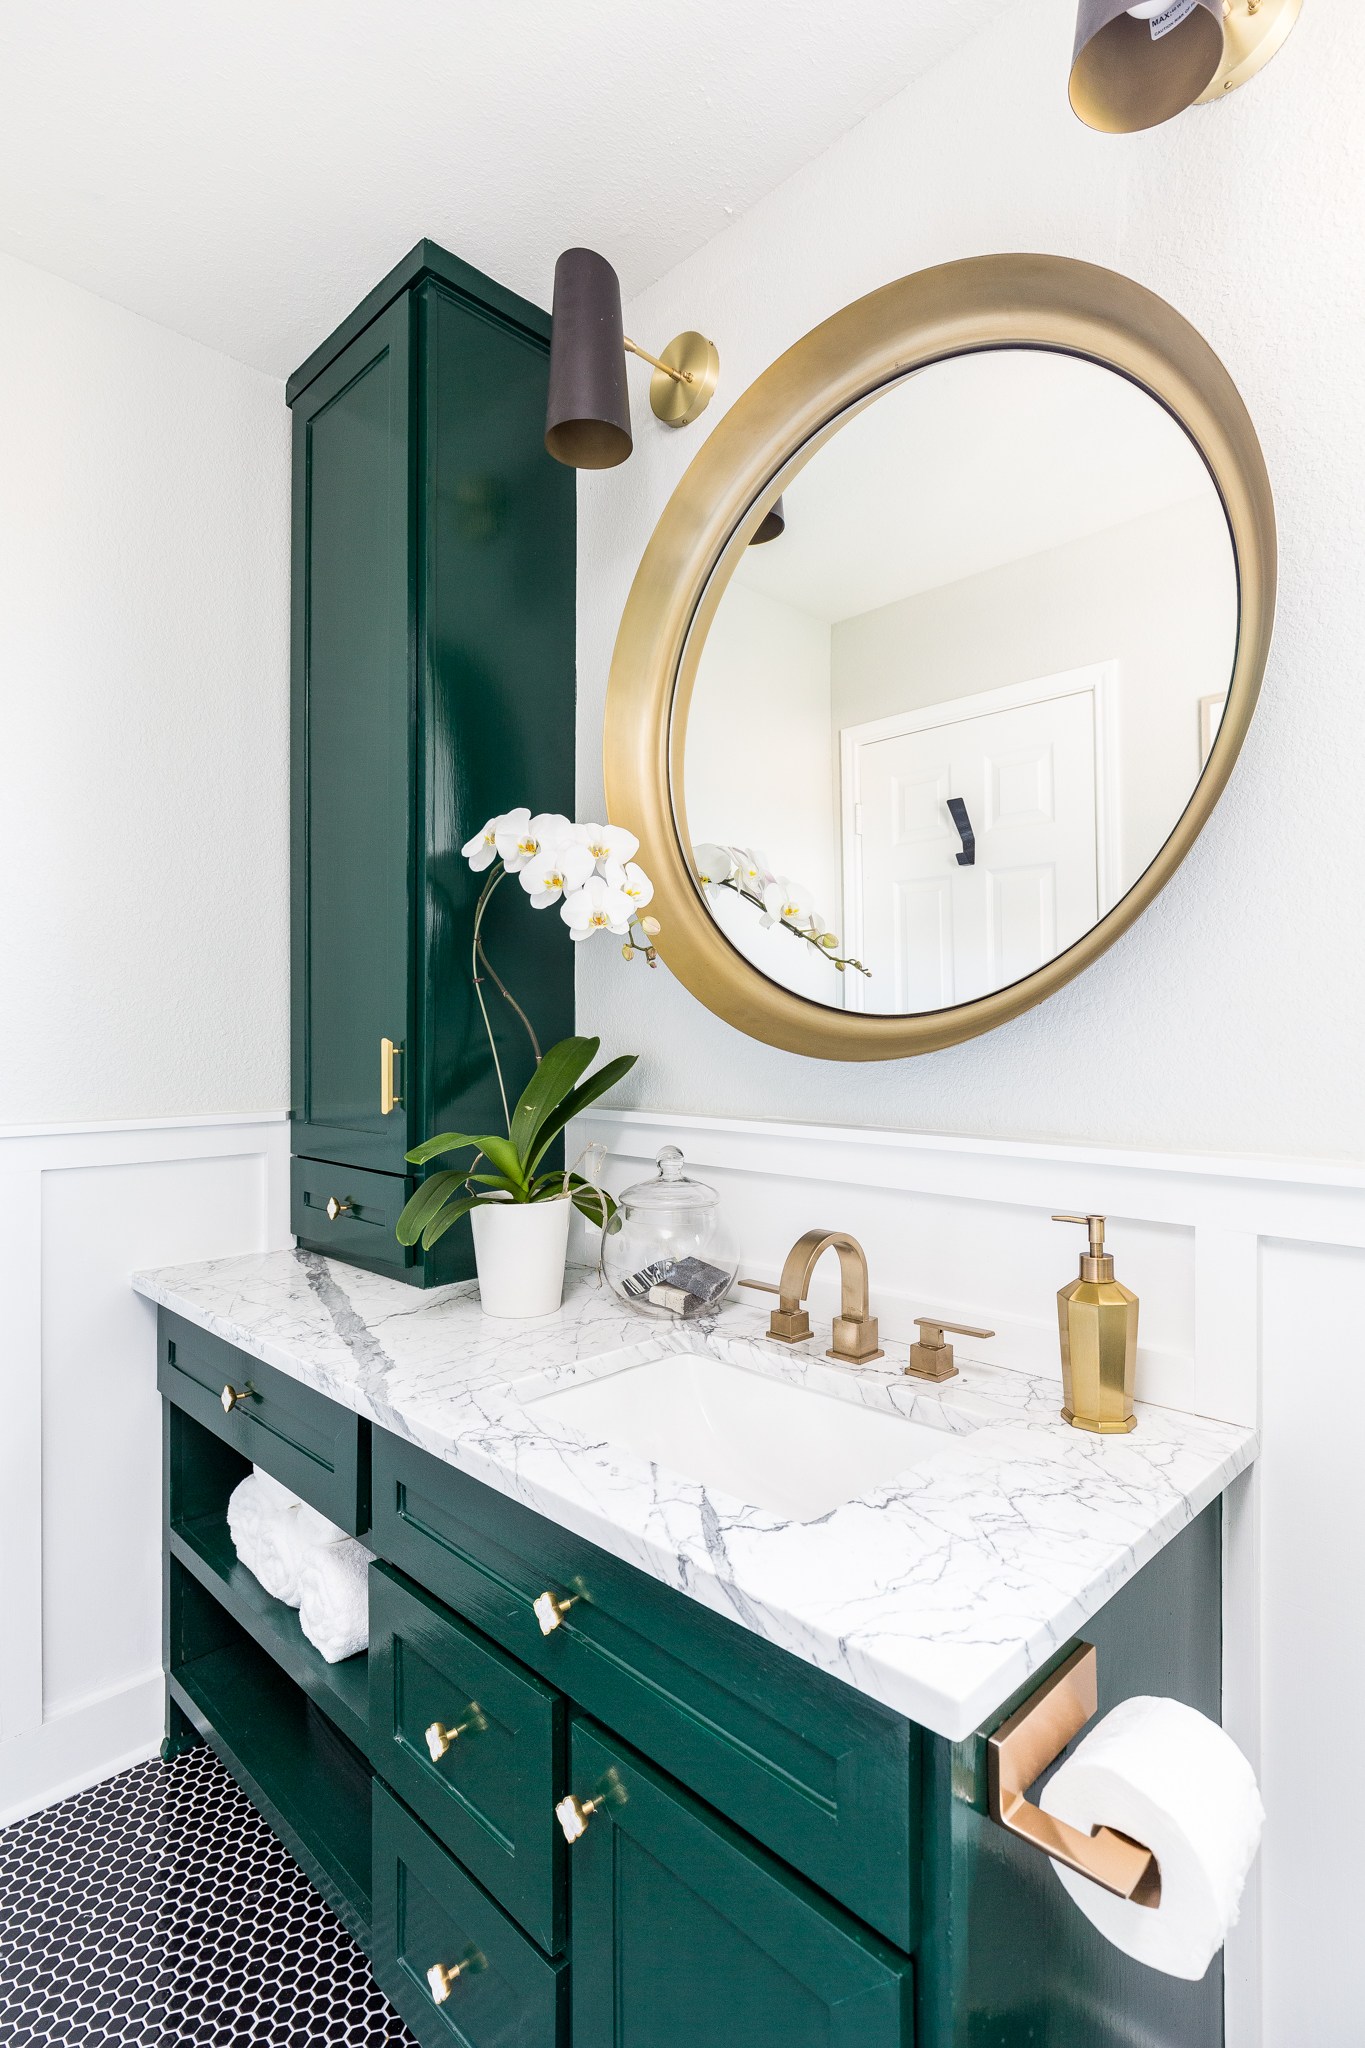 A rich turquoise cabinetry in this bathroom with gold details.